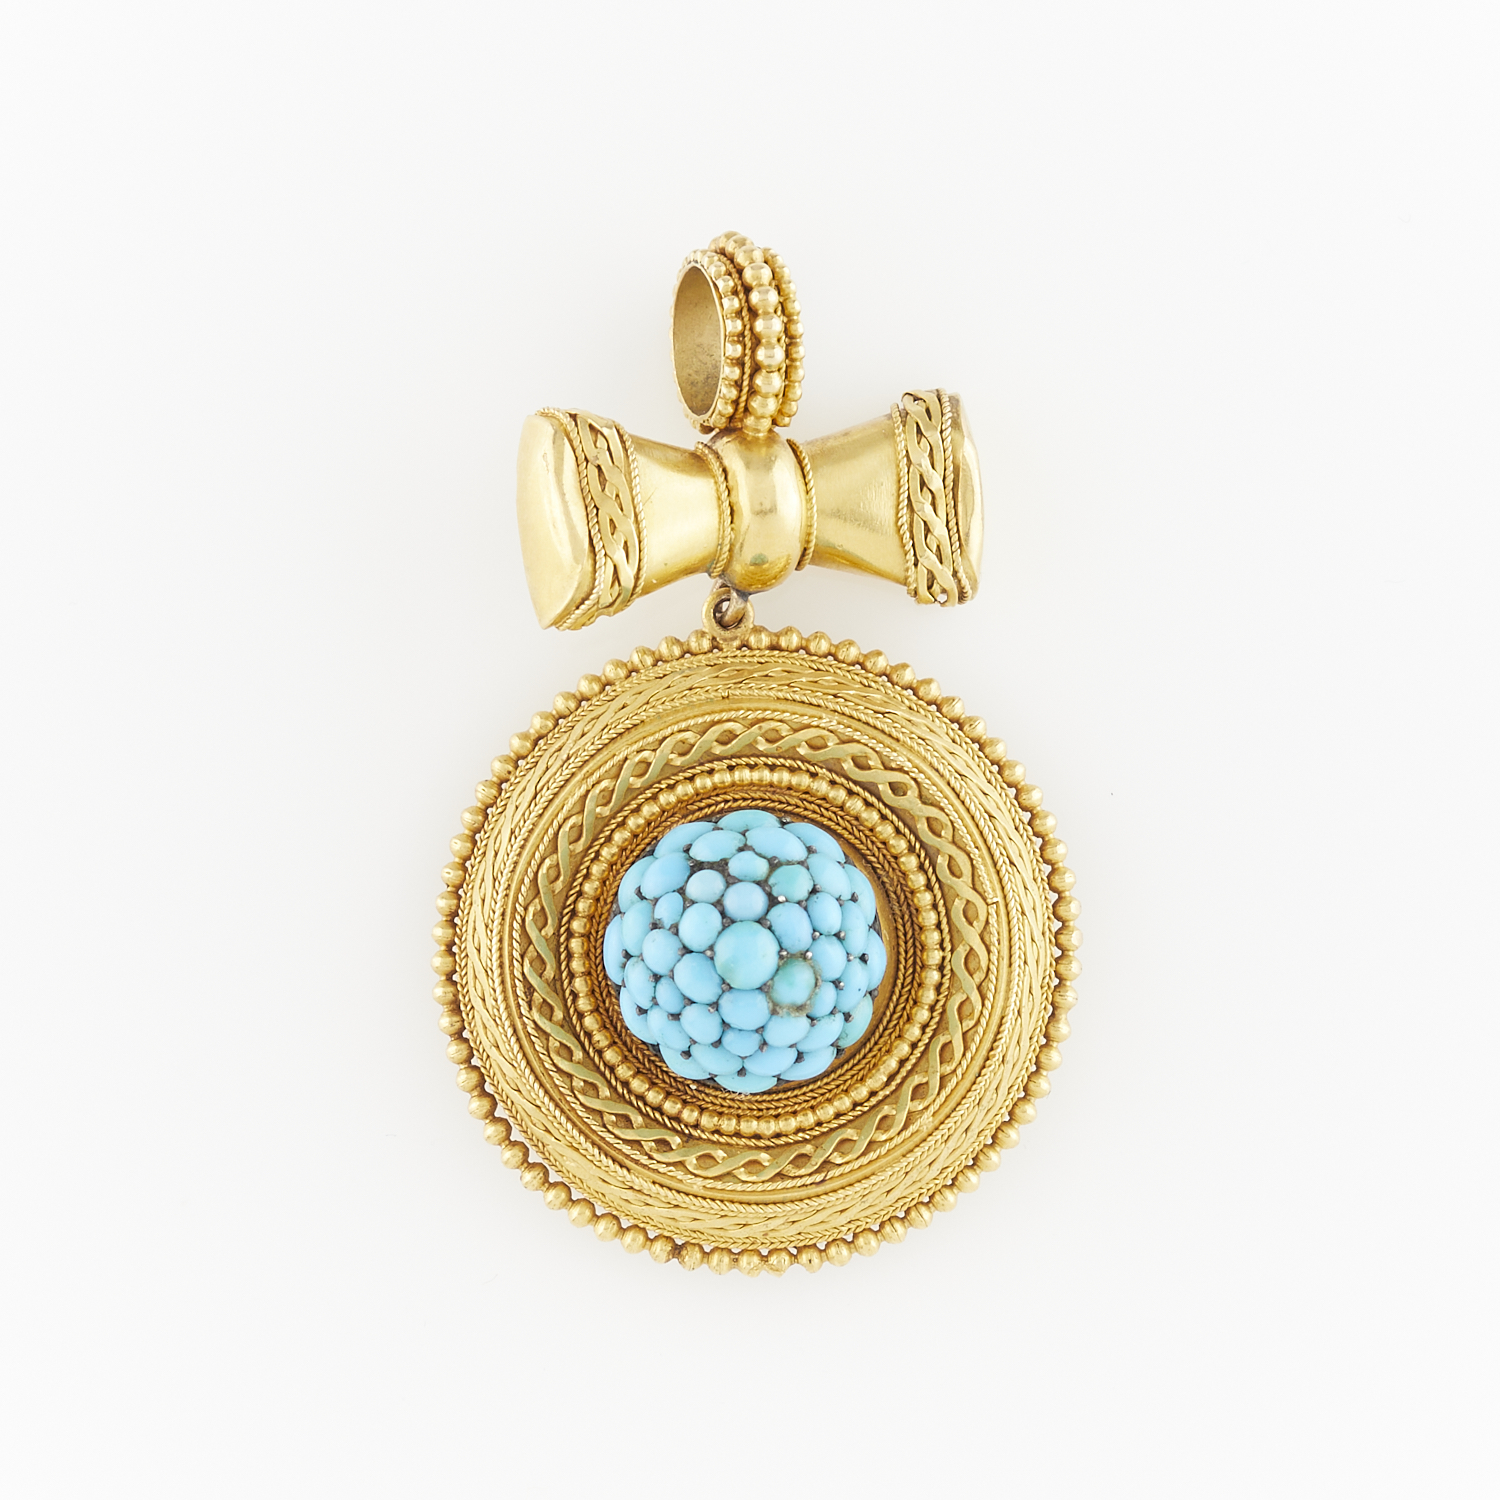 Etruscan Revival Gold & Turquoise Pendant